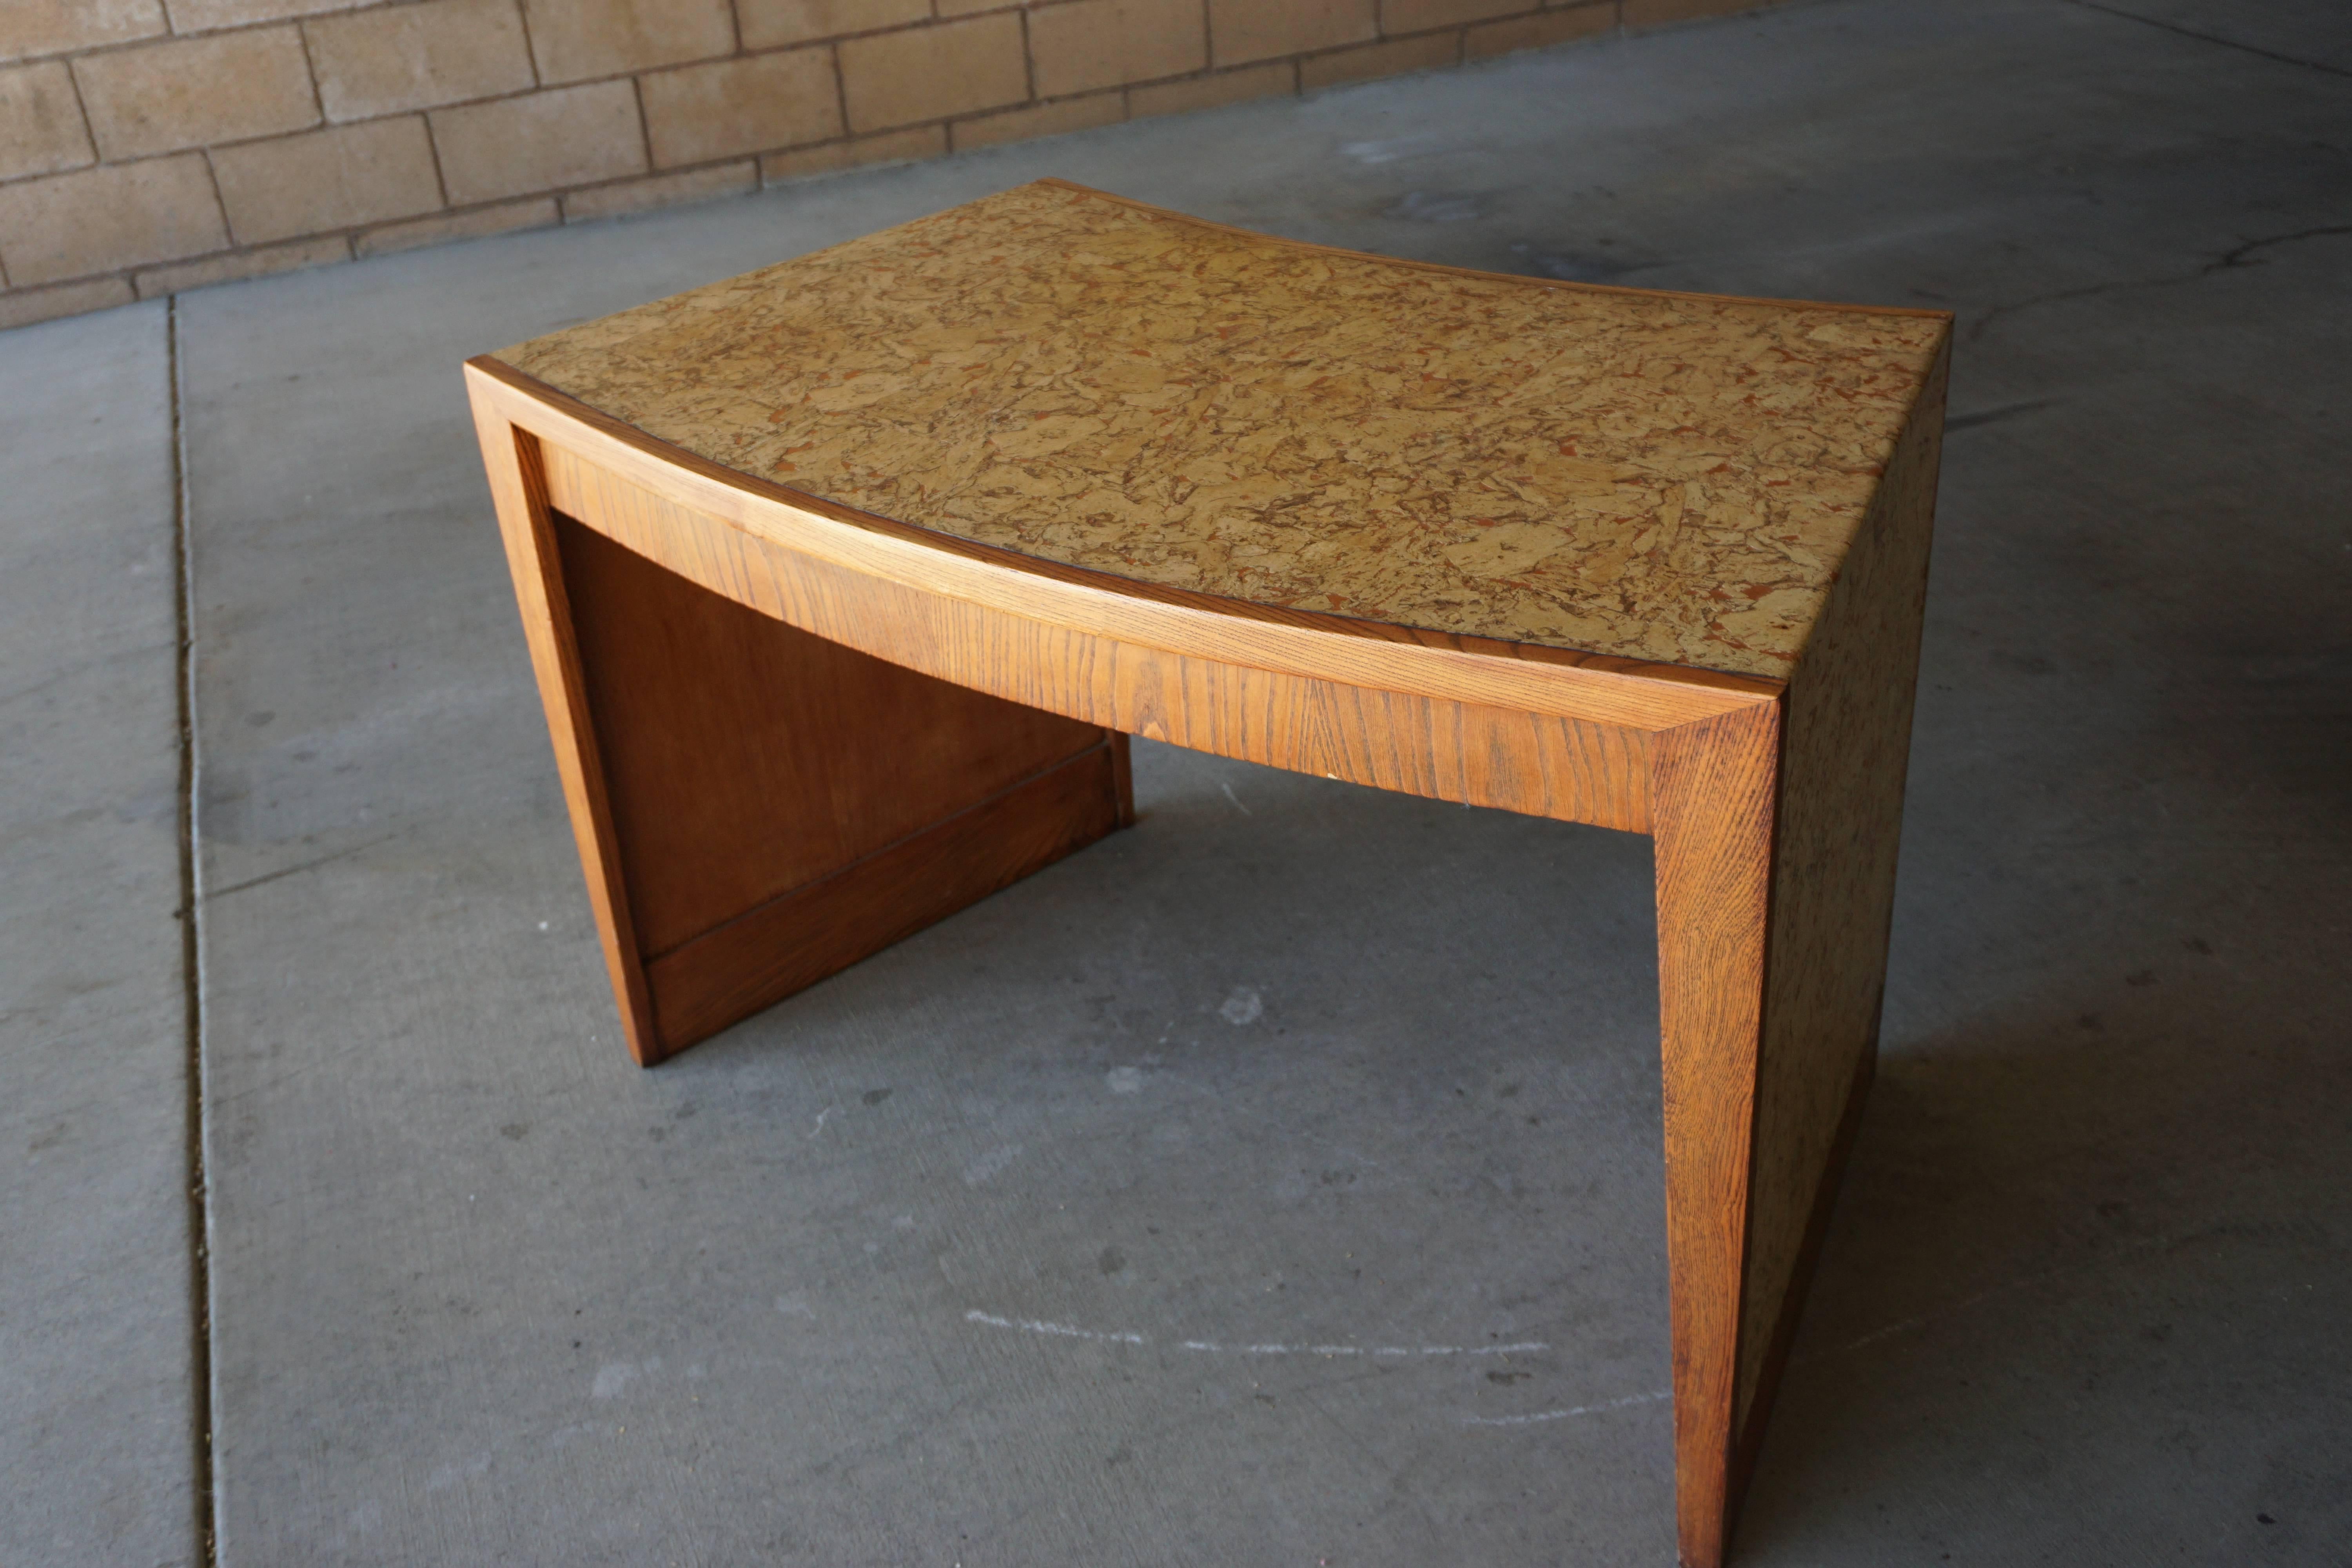 Copper Cork Covered Oak Writing Table from Steve McQueen's Residence in Palm Springs